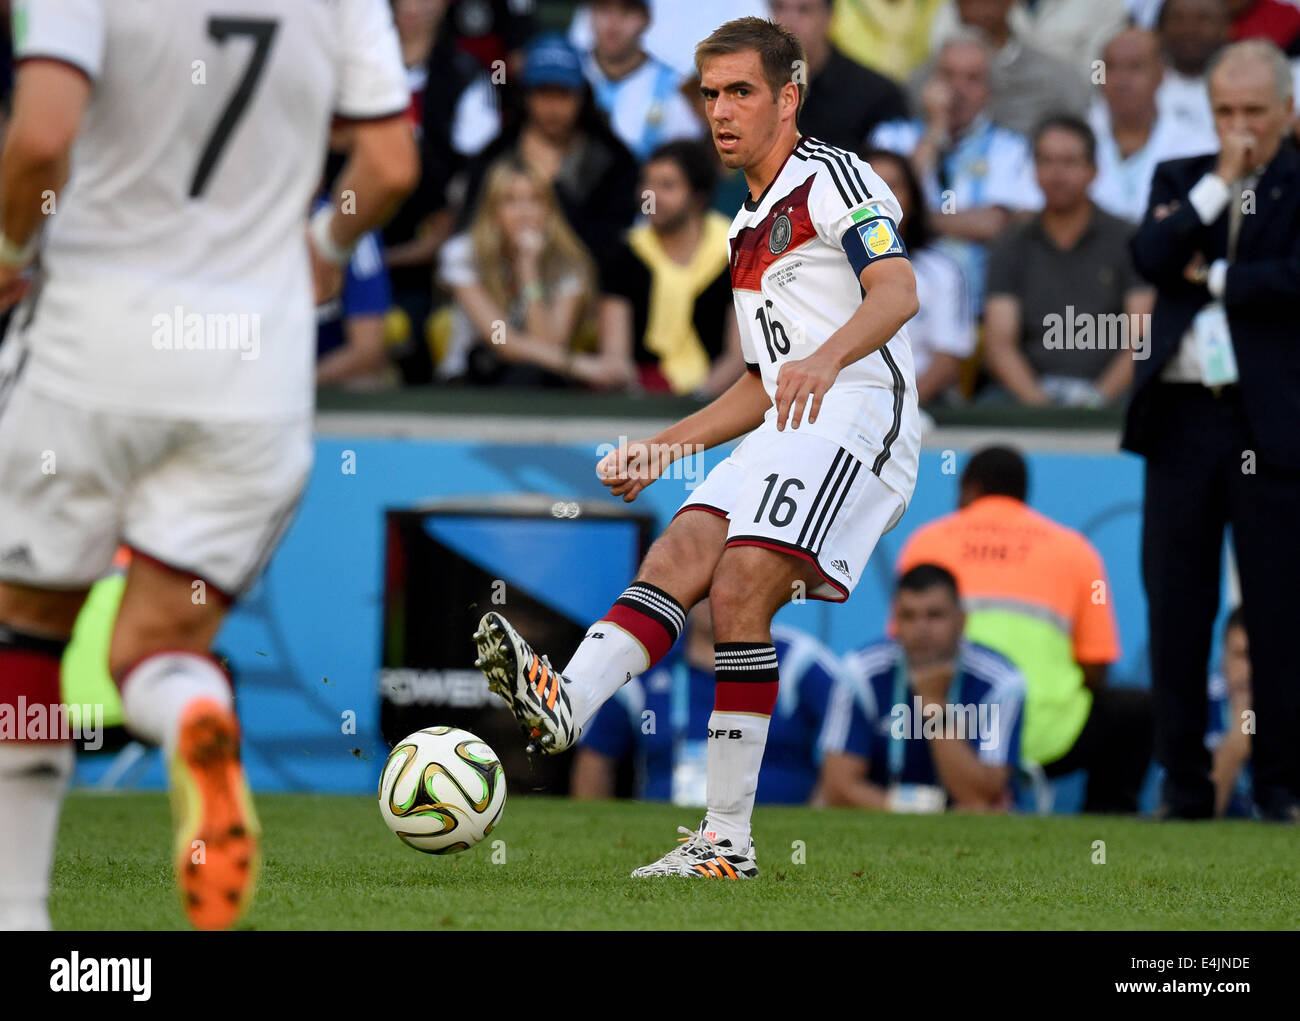 Rio de Janeiro, Brazil. 13th July, 2014. Philipp Lahm of Germany in action during the FIFA World Cup 2014 final soccer match between Germany and Argentina at the Estadio do Maracana in Rio de Janeiro, Brazil, 13 July 2014. Photo: Marcus Brandt/dpa/Alamy Live News Stock Photo